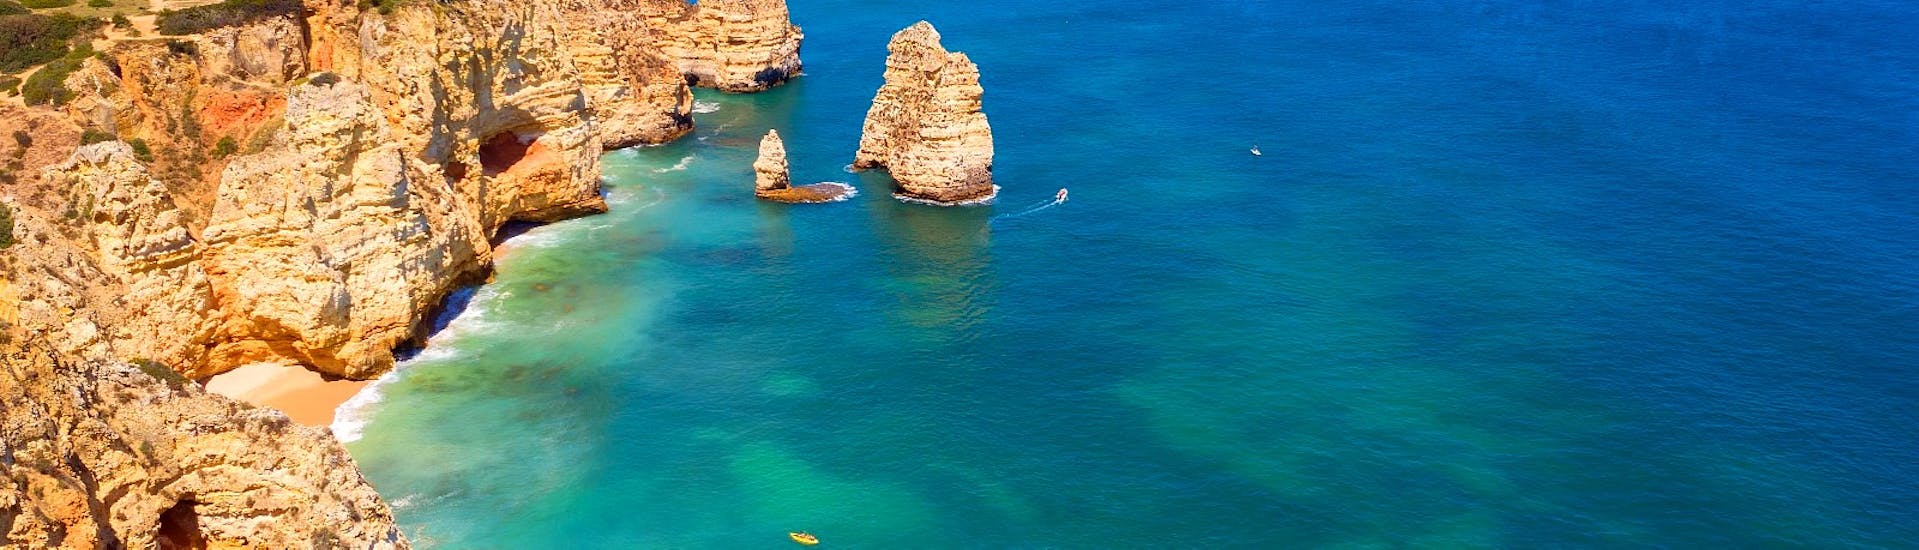 The beautiful view of some caves and grottos along the coast of the Algarve during a private romantic sunset boat trip from Lagos with Funtastik Tours Lagos.